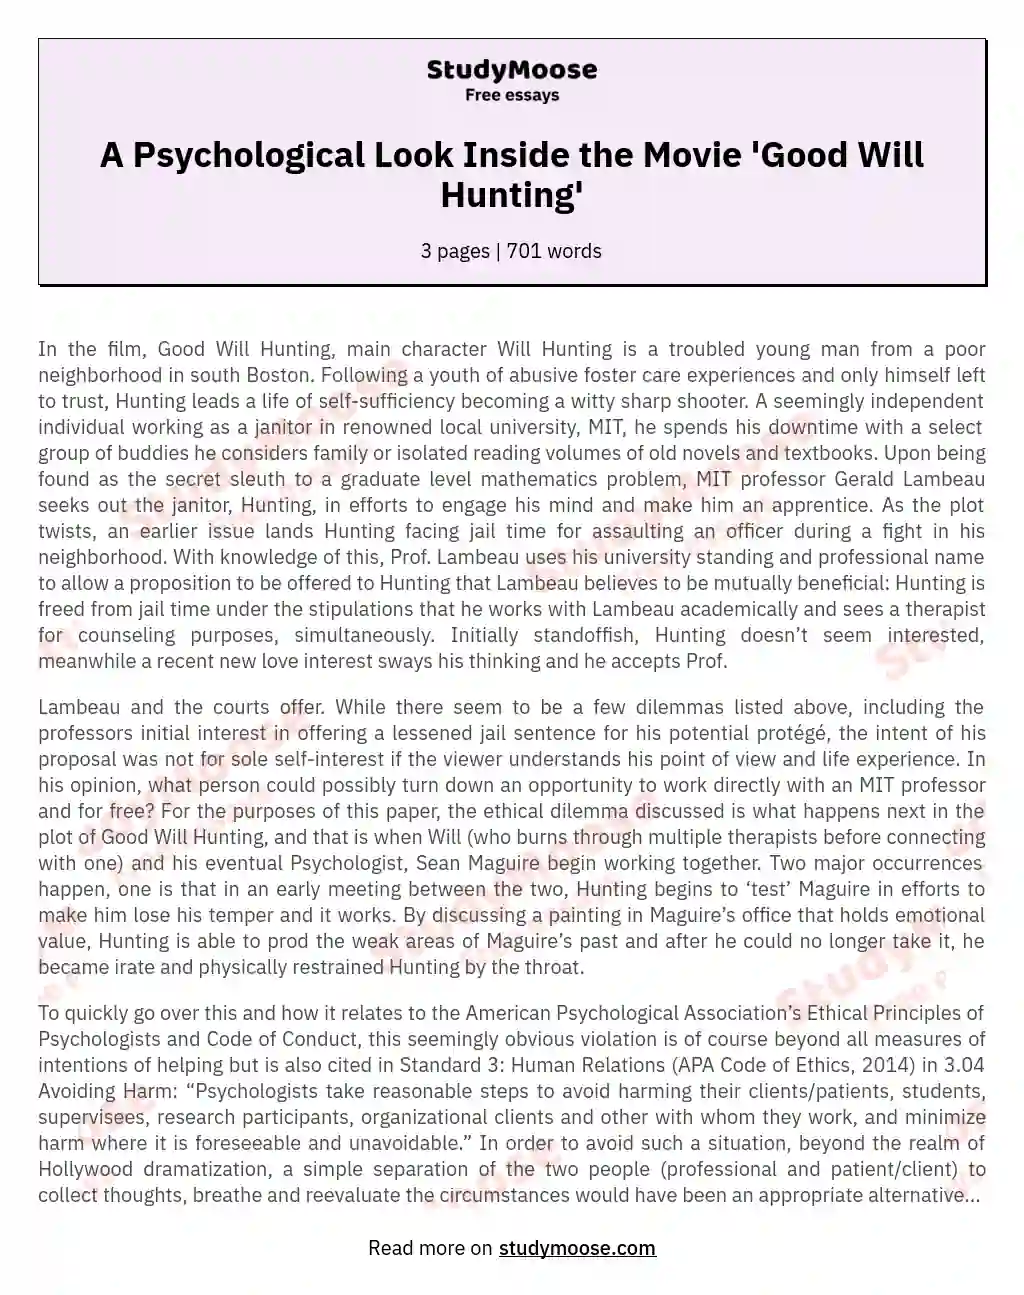 A Psychological Look Inside the Movie 'Good Will Hunting'